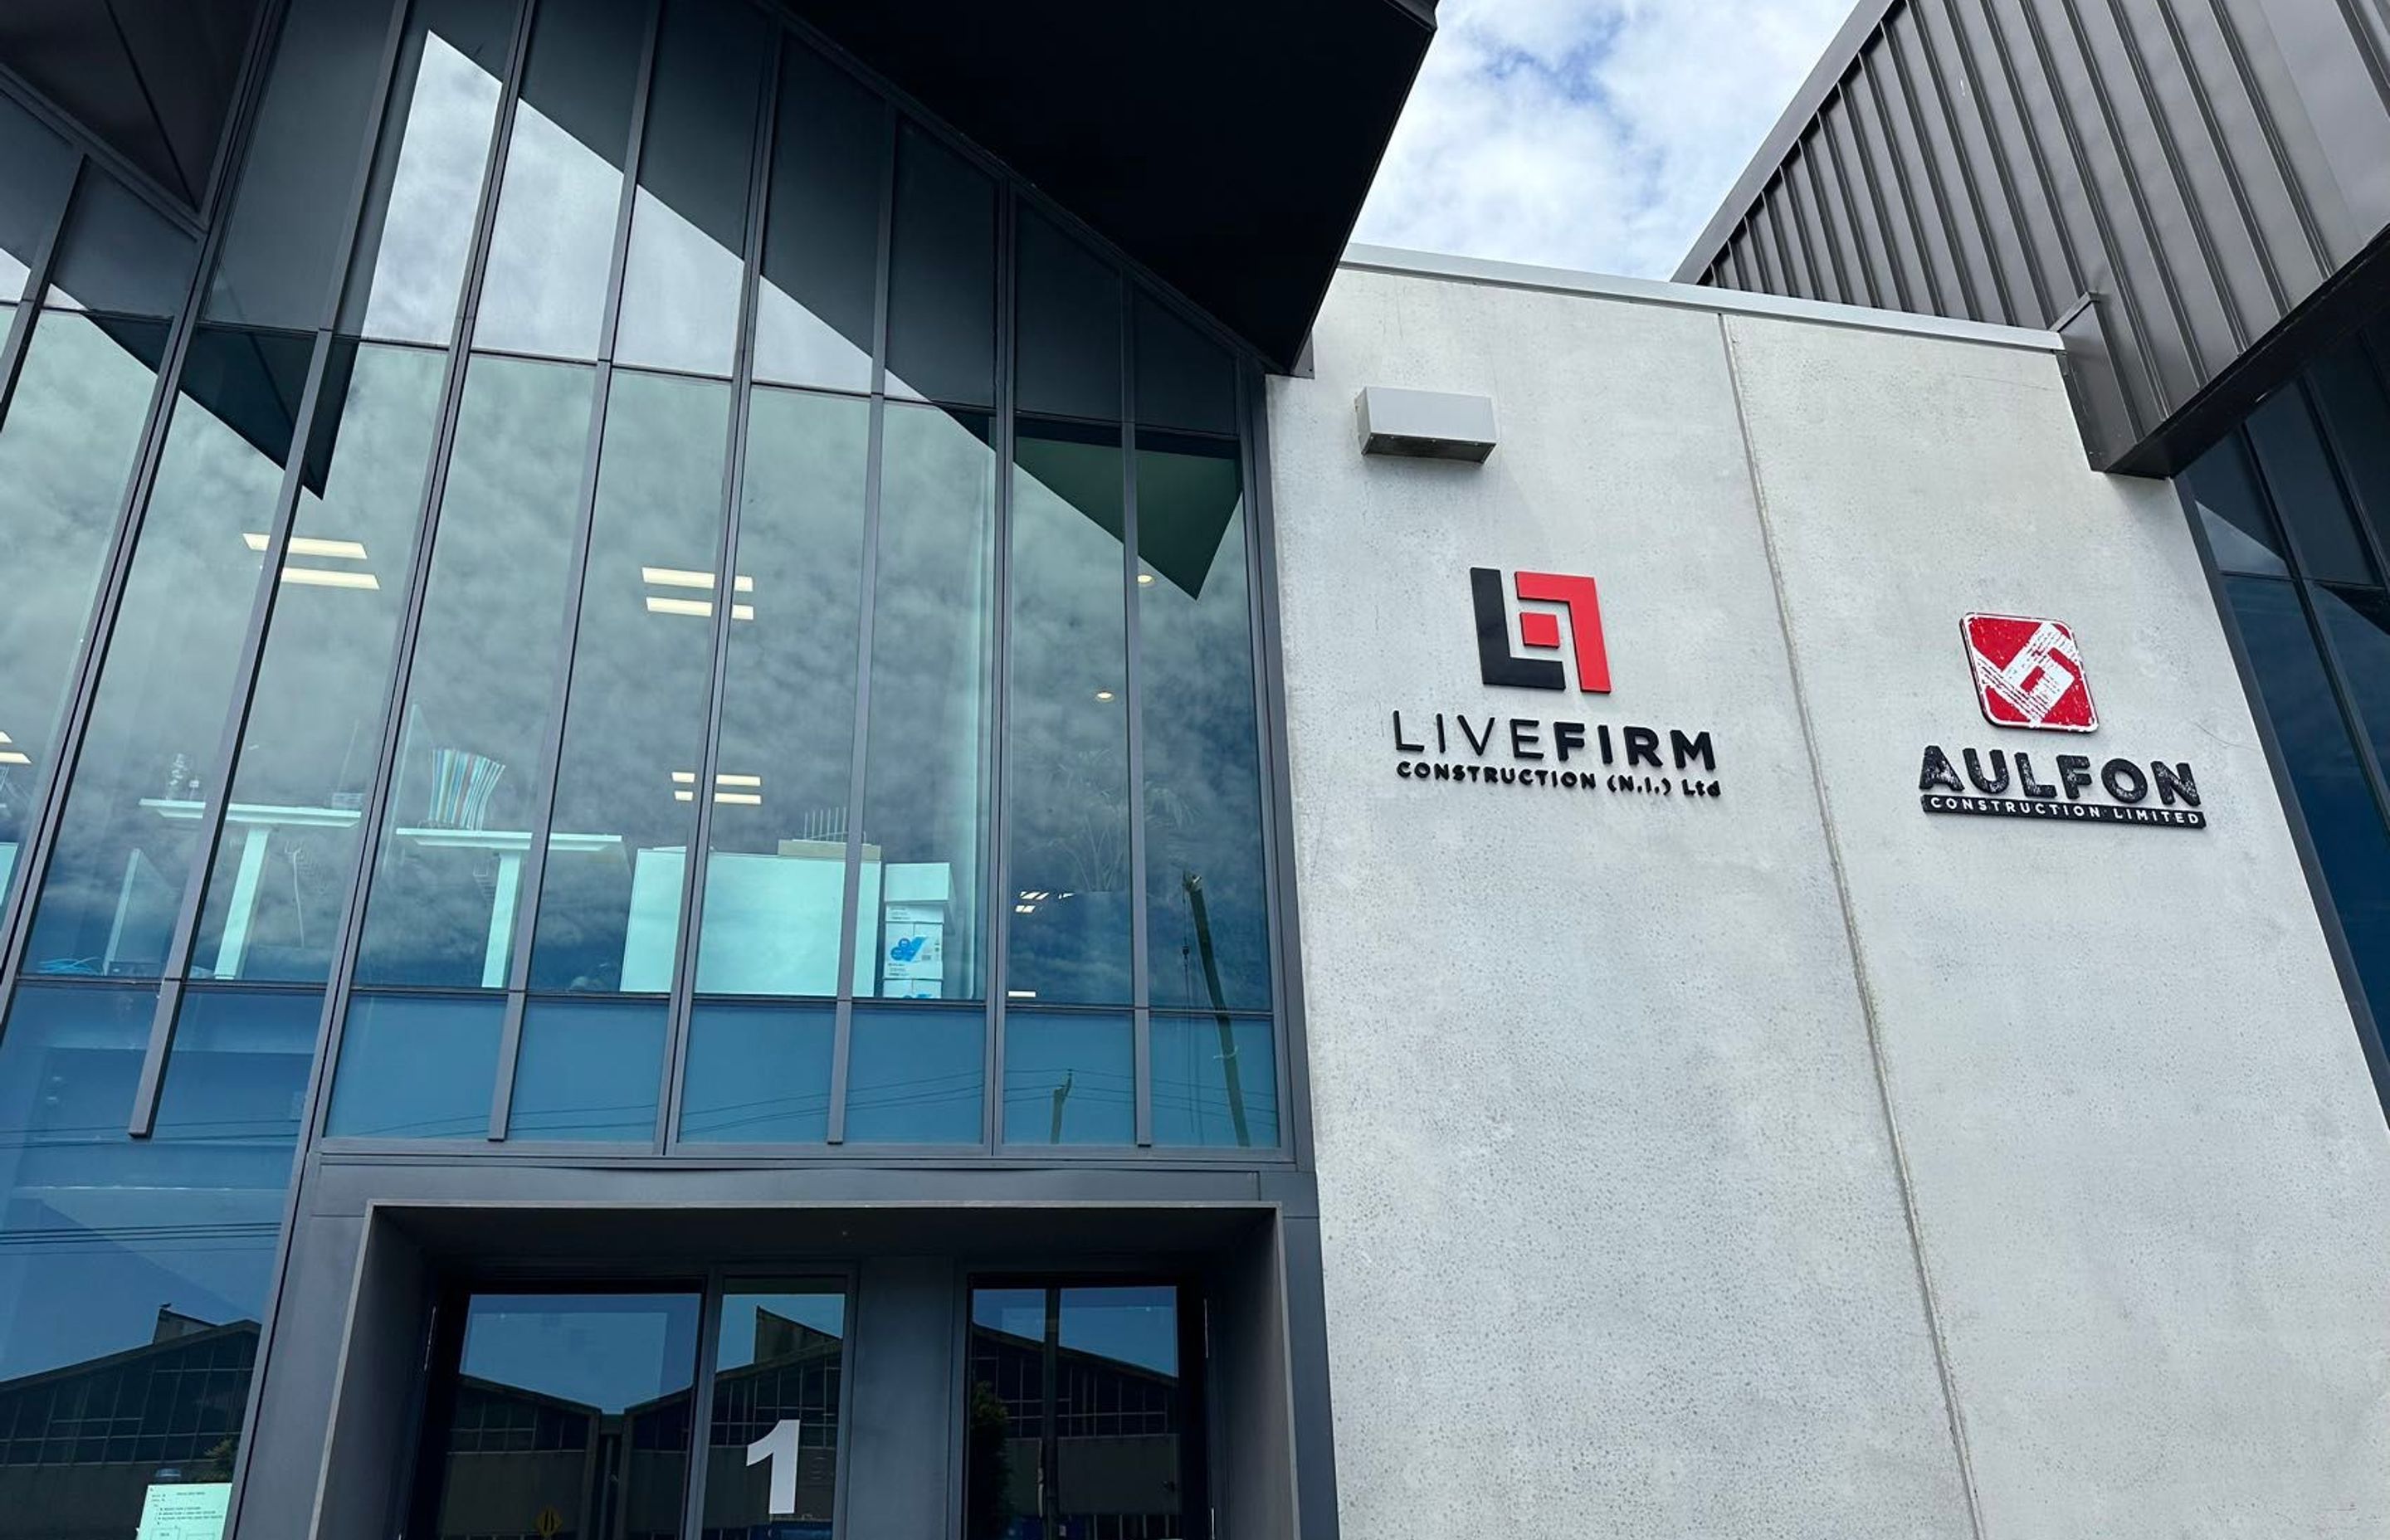 LIVEFIRM Construction &amp; AULFON Construction New Office